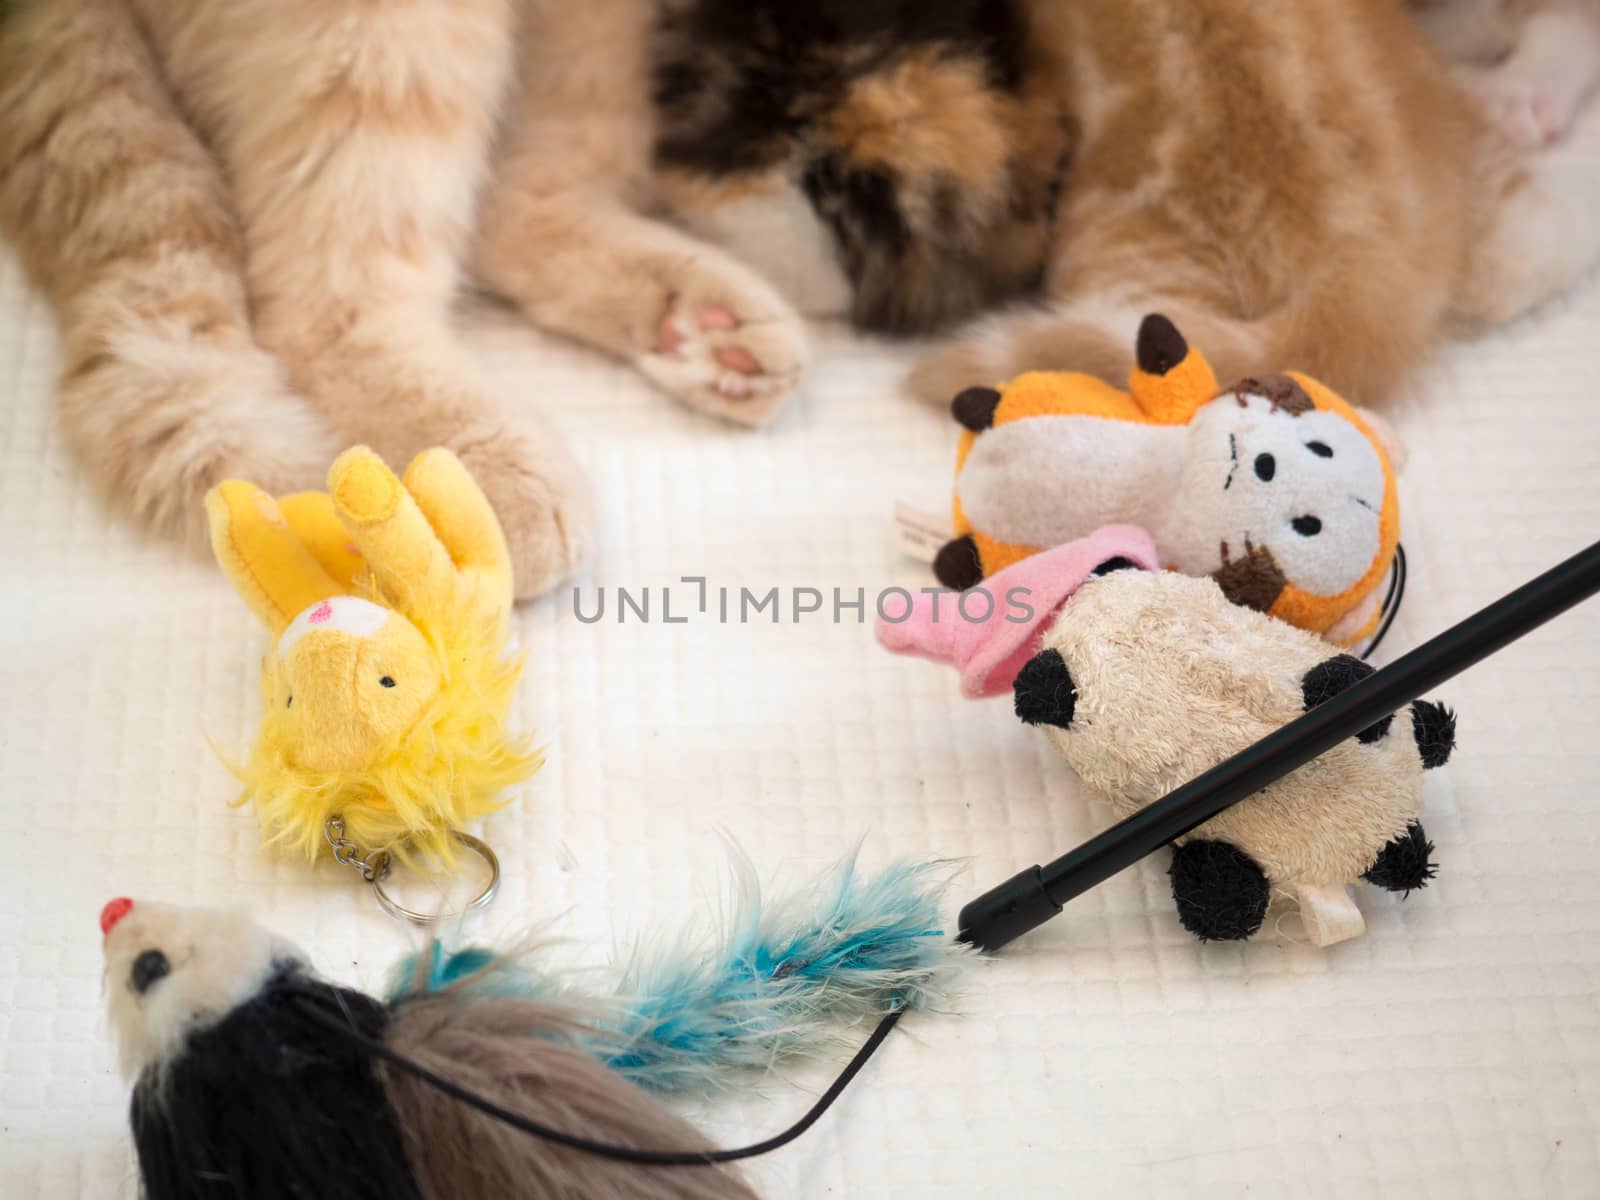 cat paws with toys (Cat breastfeeding the kittens) blur background